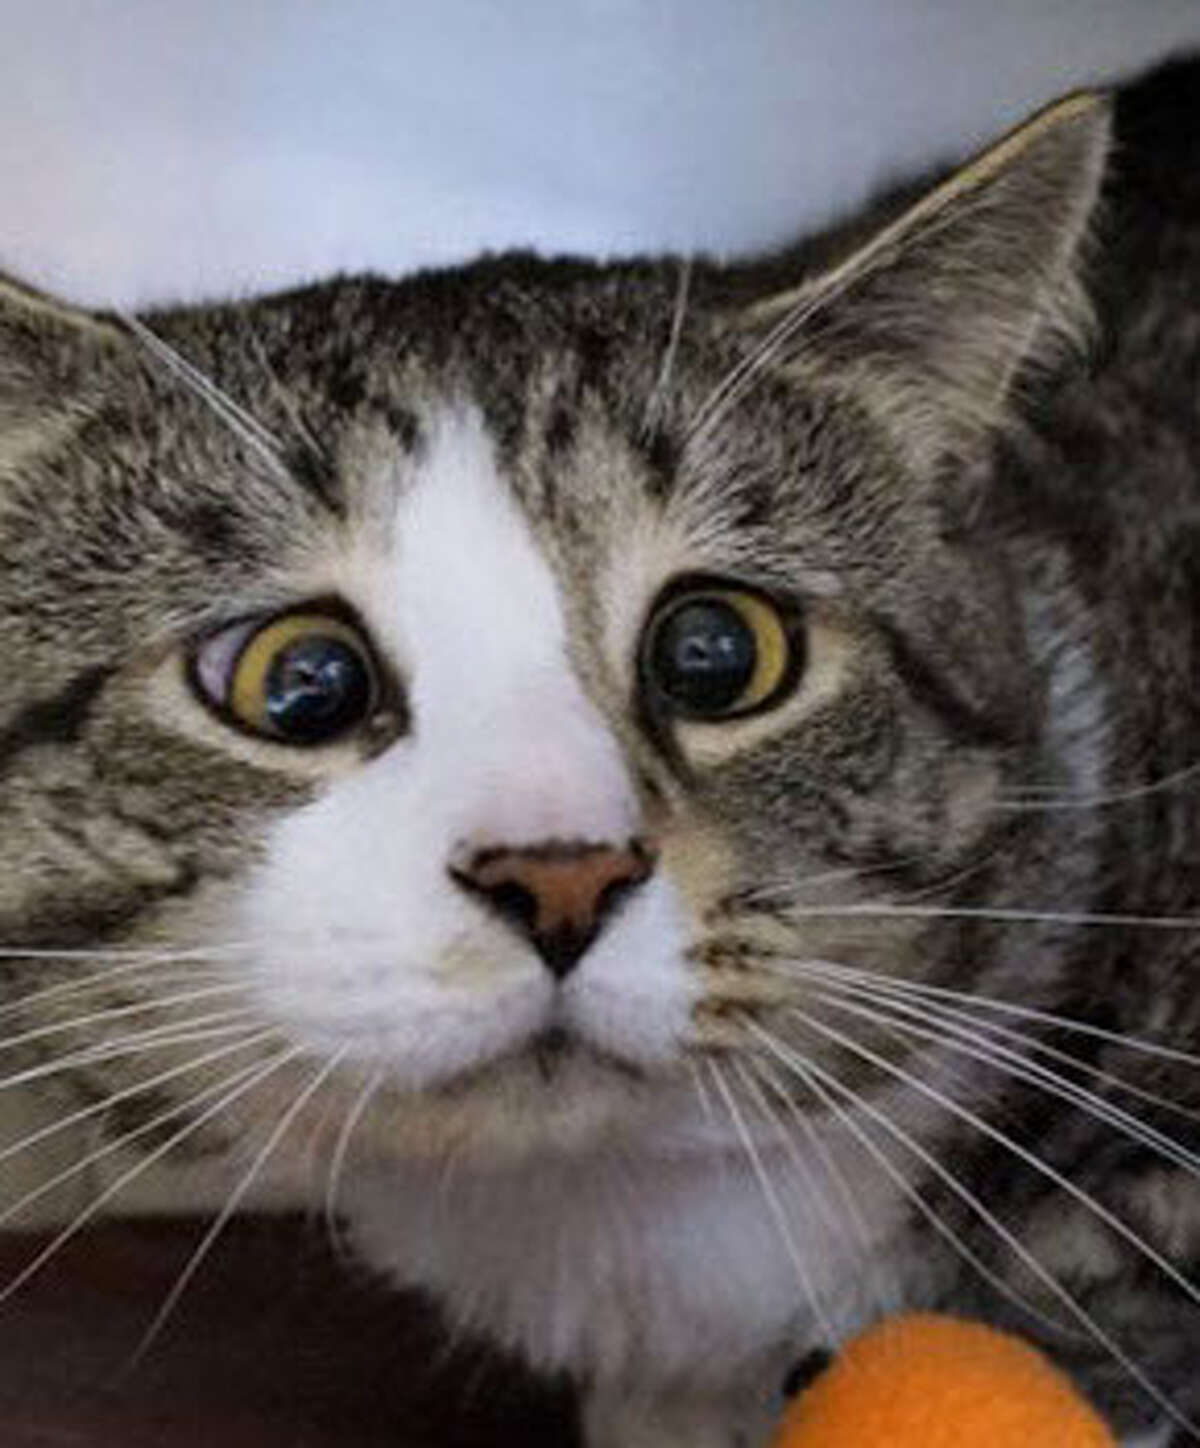 Benjamin Franklin is a 6-year-old tabby cat who was rescued by the Animal Welfare Society in New Milford, CT.